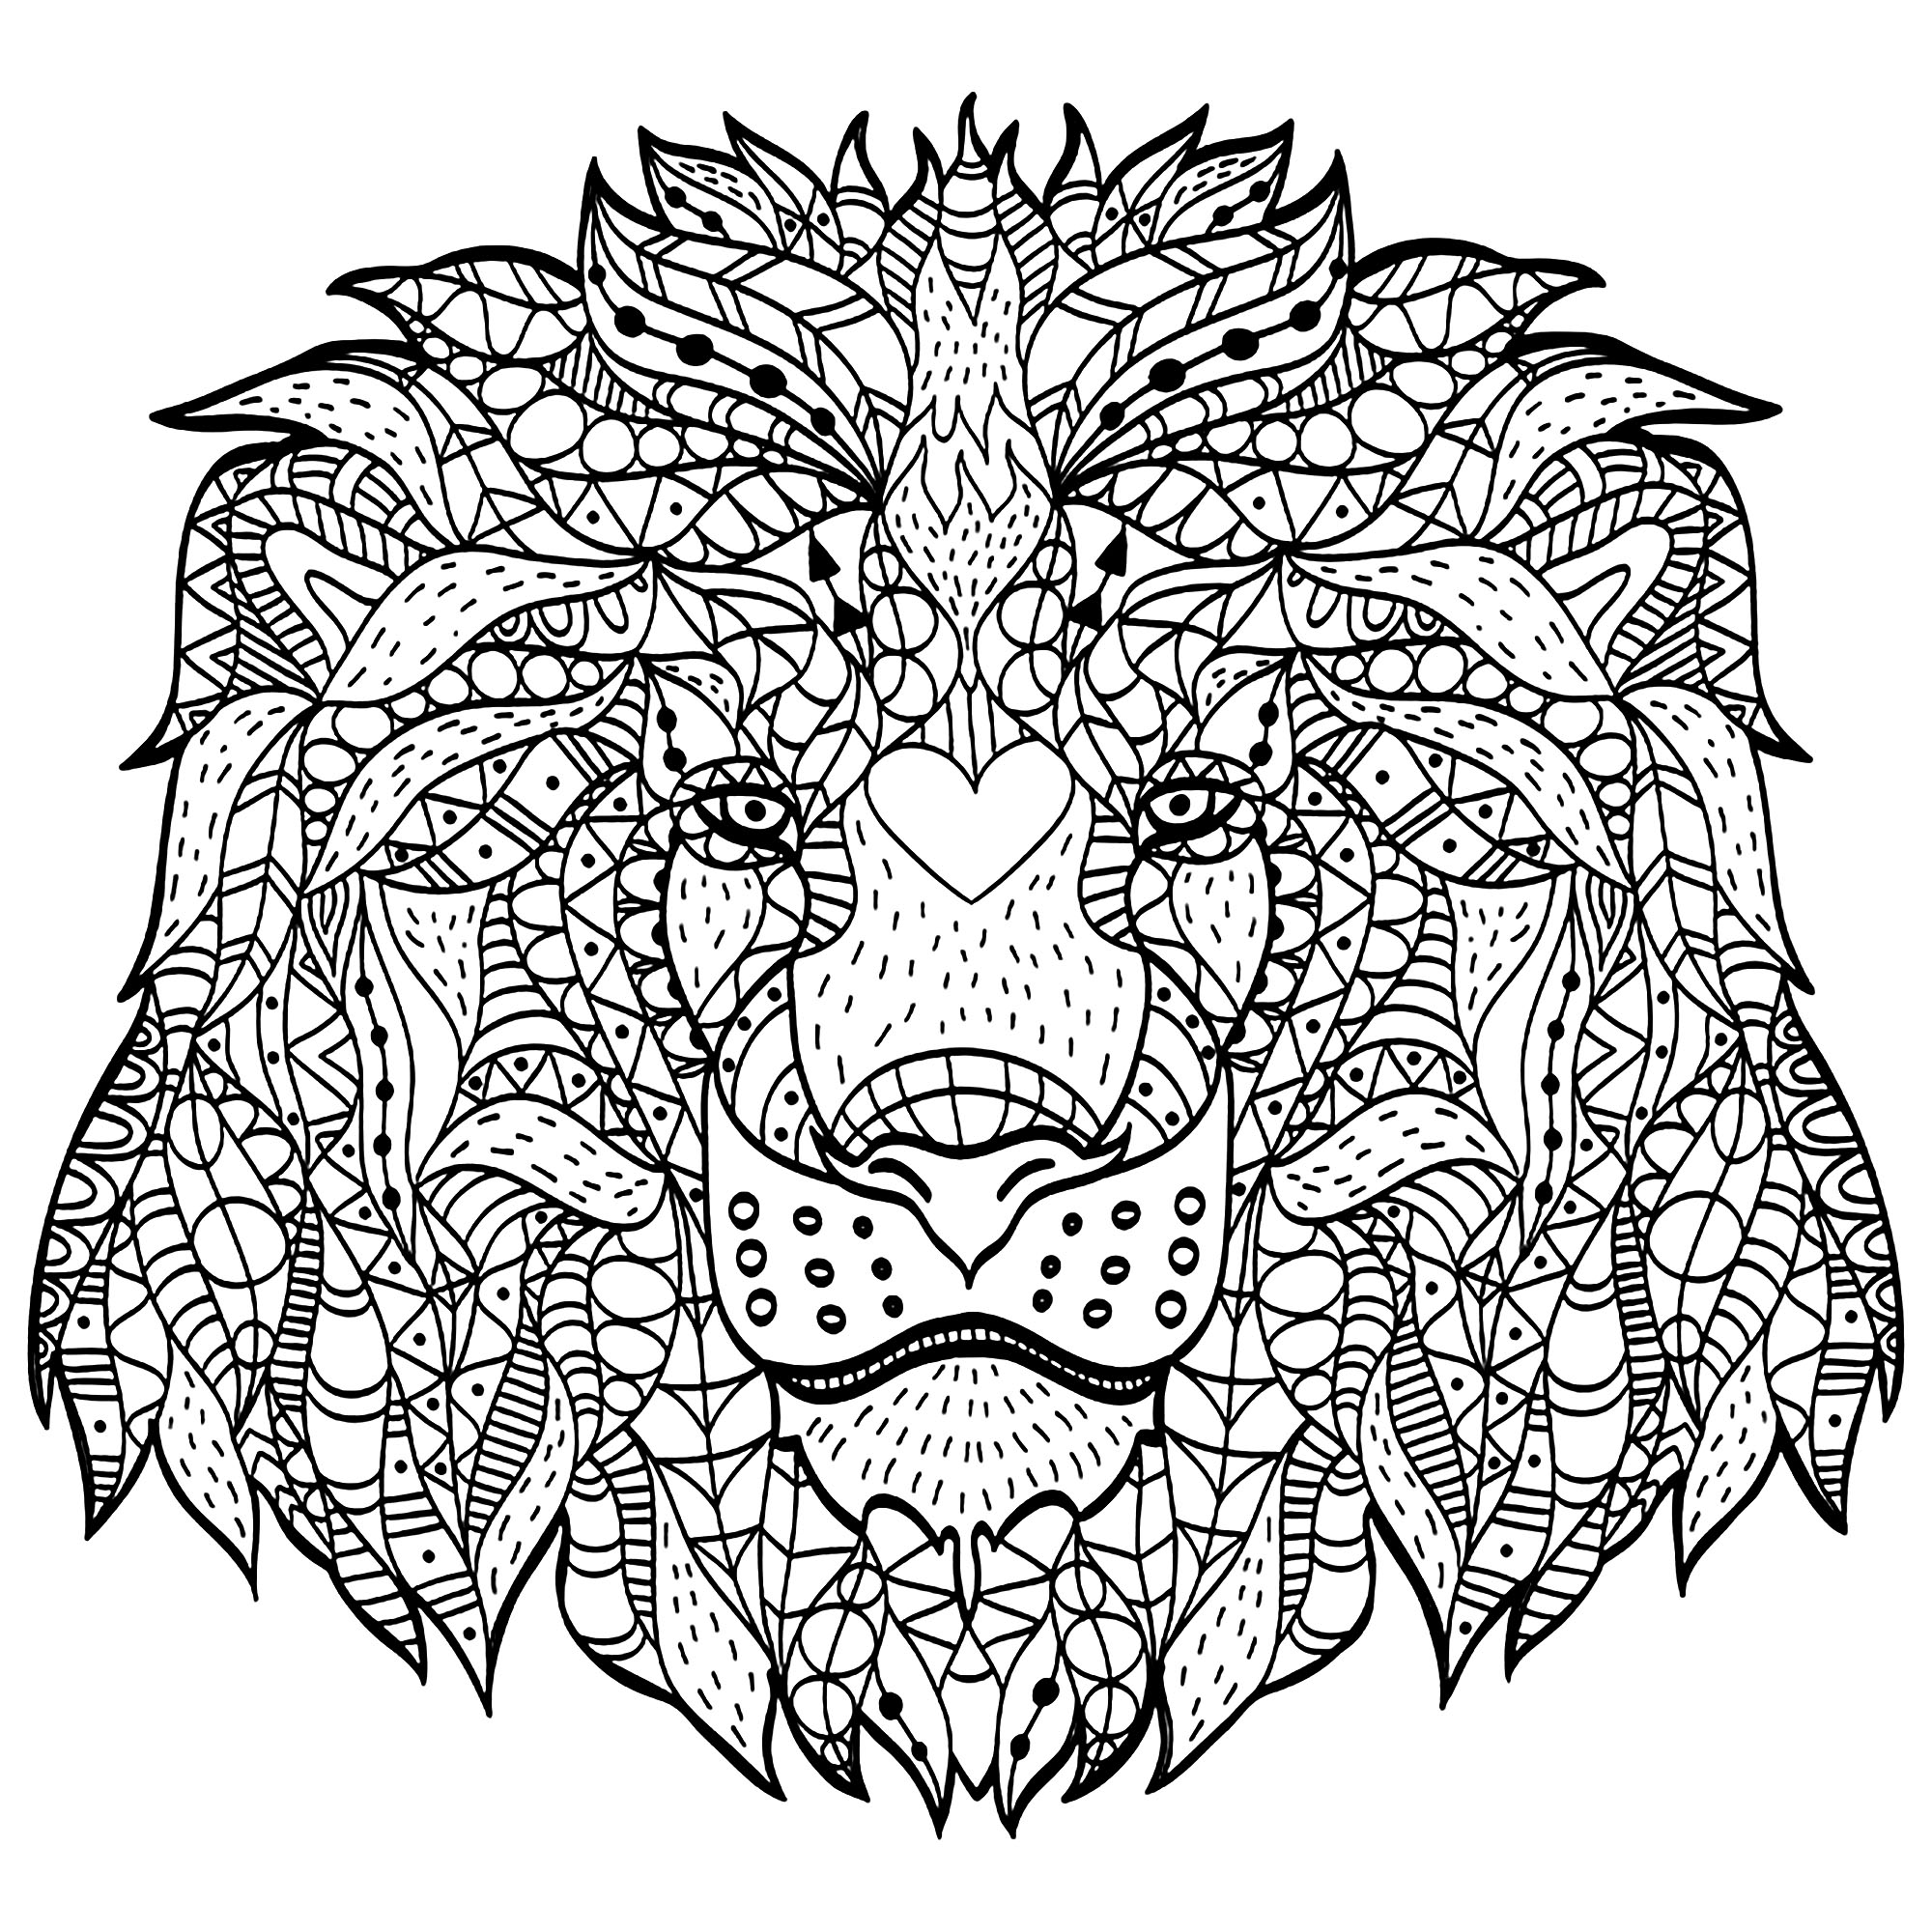 This lion's head created with Zentangle patterns will ask you a lot of concentration! Enjoy!, Artist : Viktoriia Panchenko   Source : 123rf